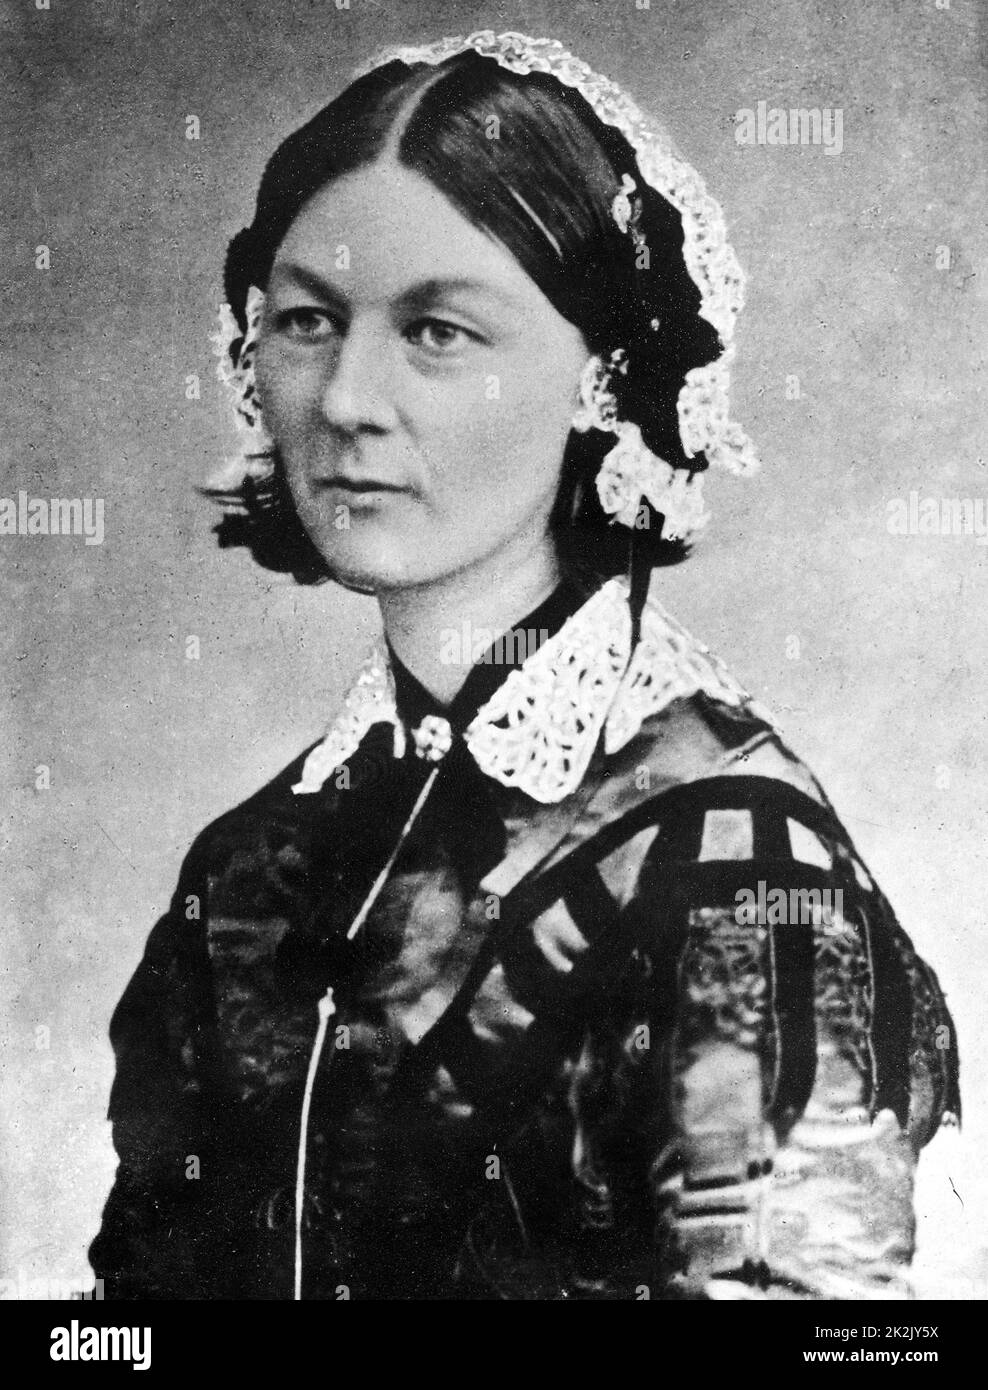 A Photograph Of A Young Florence Nightingale The Founder Of Modern Nursing As Well As A 9102